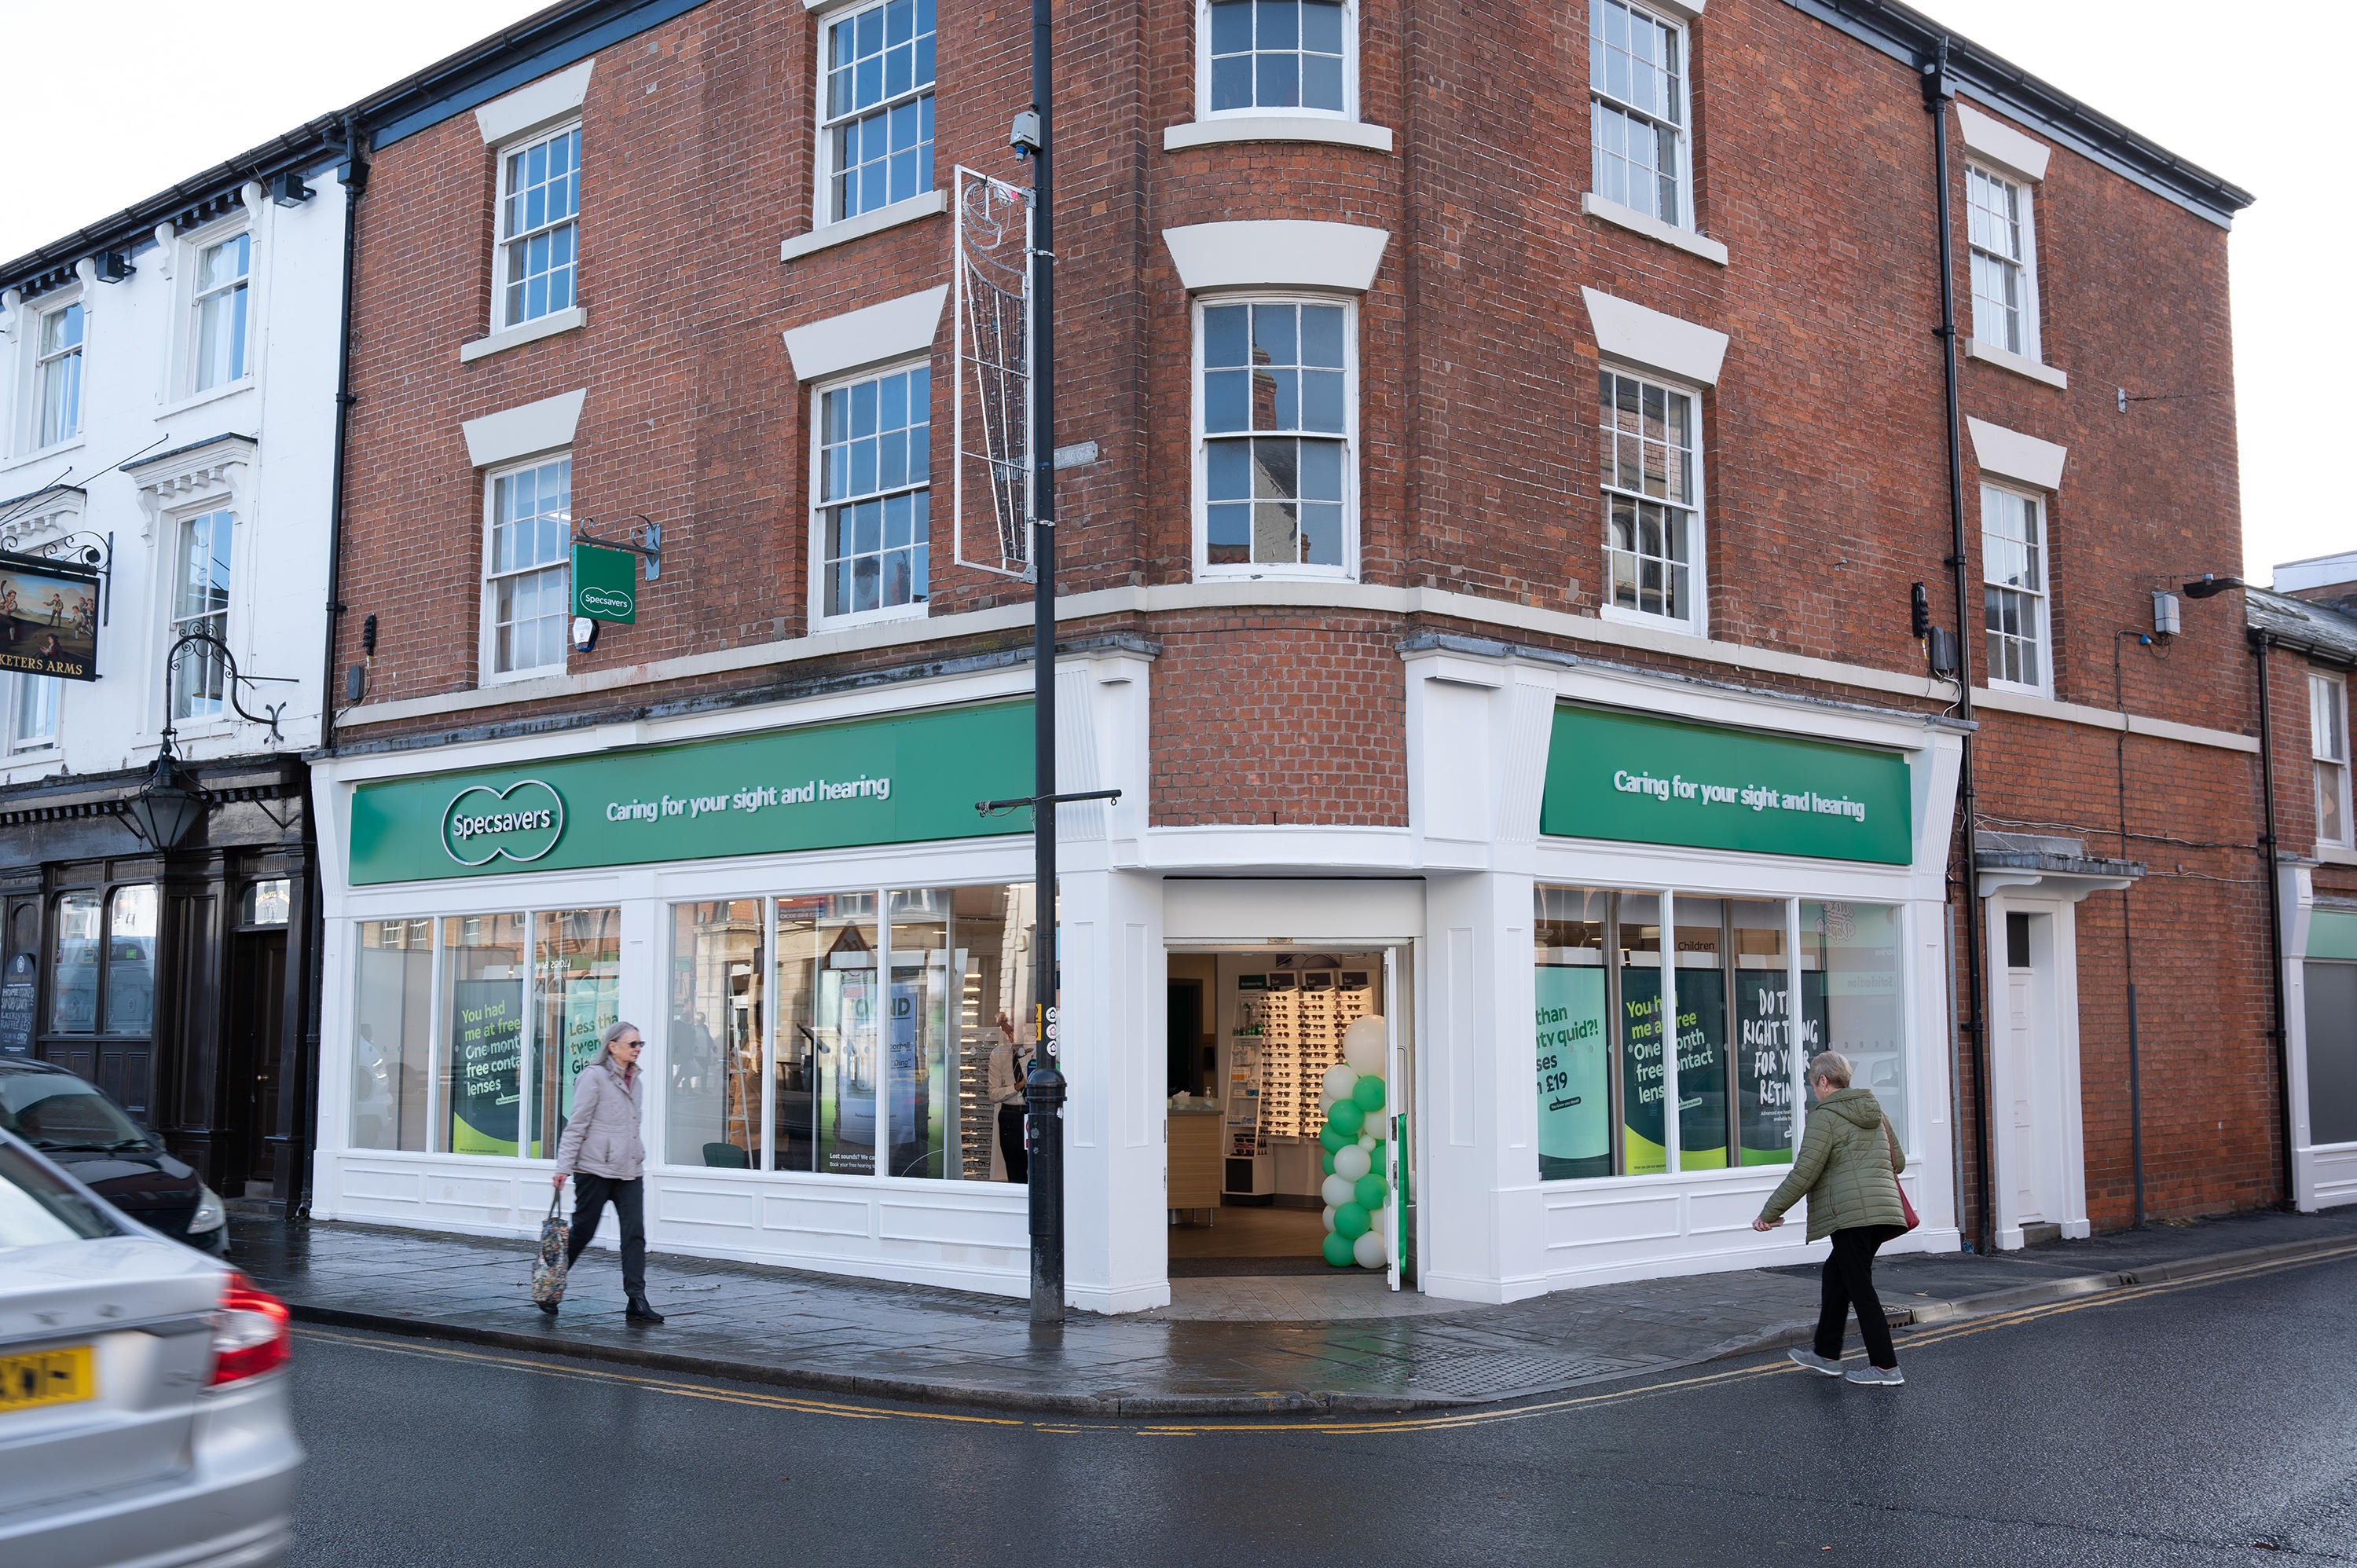 Images Specsavers Opticians and Audiologists - Selby